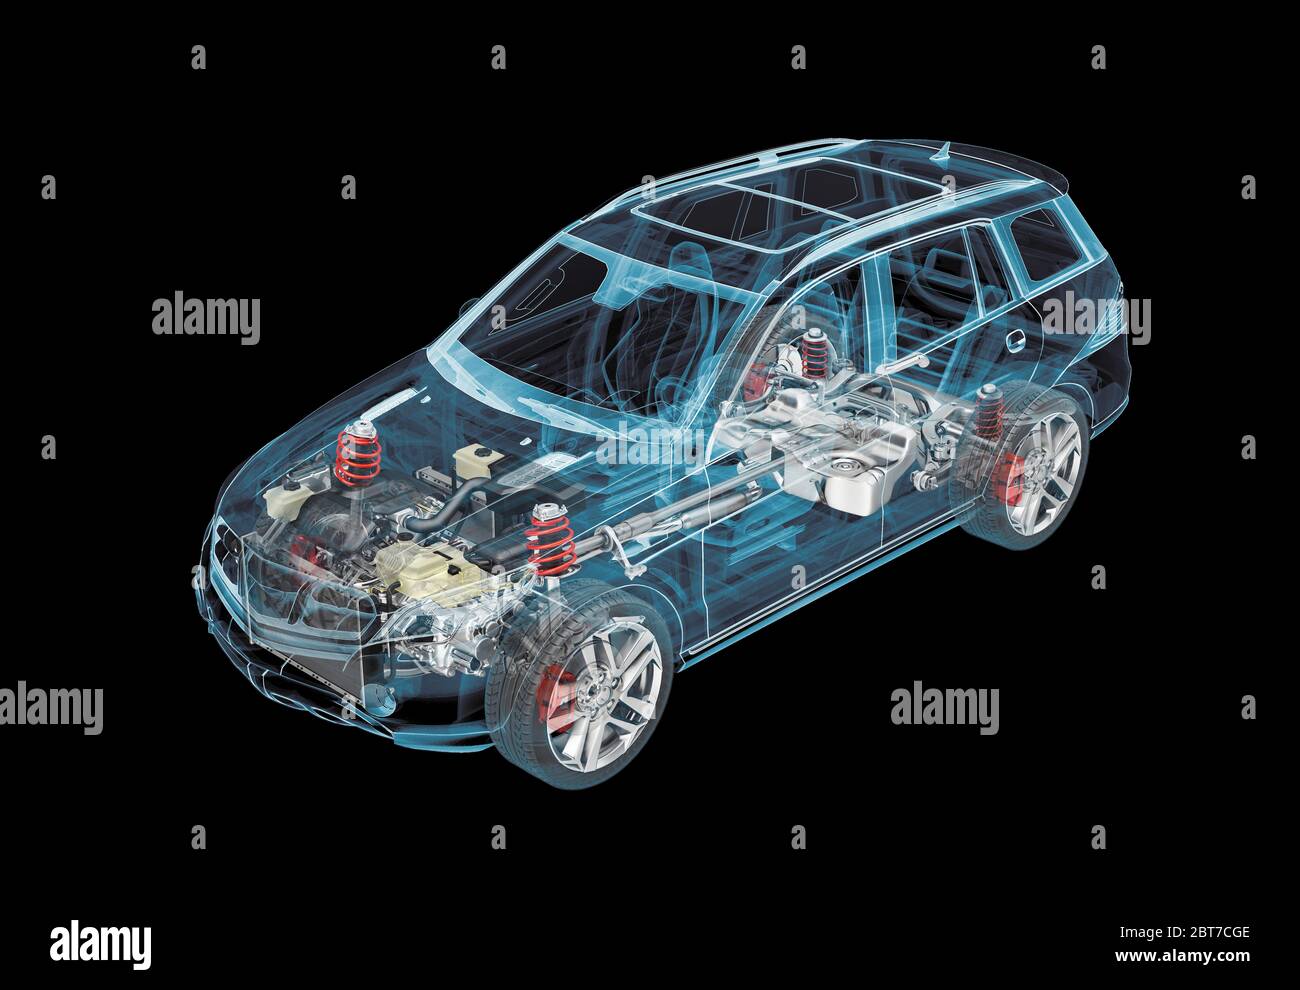 Technical 3d illustration of SUV car with x-ray effect and powertrain system. Perspective view on black background. Stock Photo